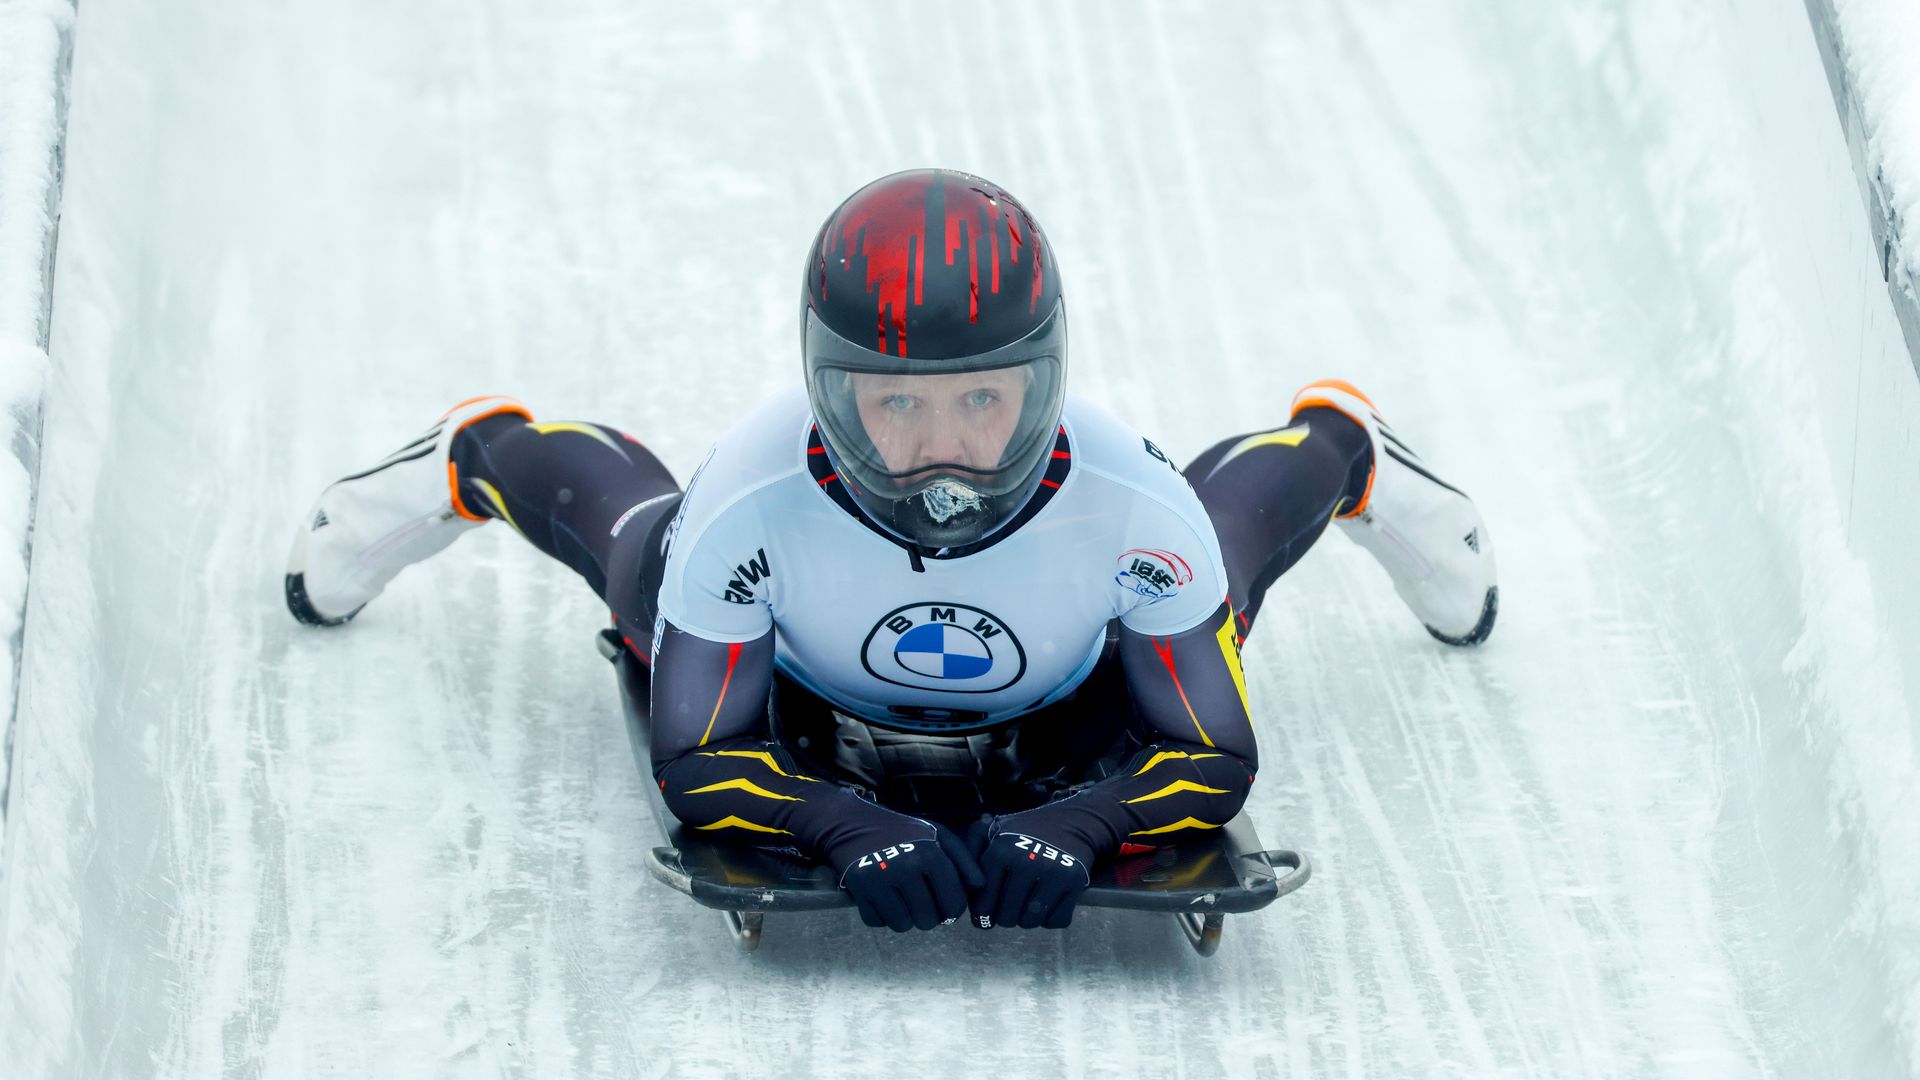 Belgium's Kim Meylemans reacts as she finishes the fourth run of the women's skeleton competition of the IBSF Skeleton World Championship in Altenberg, eastern Germany, on February 12, 2021